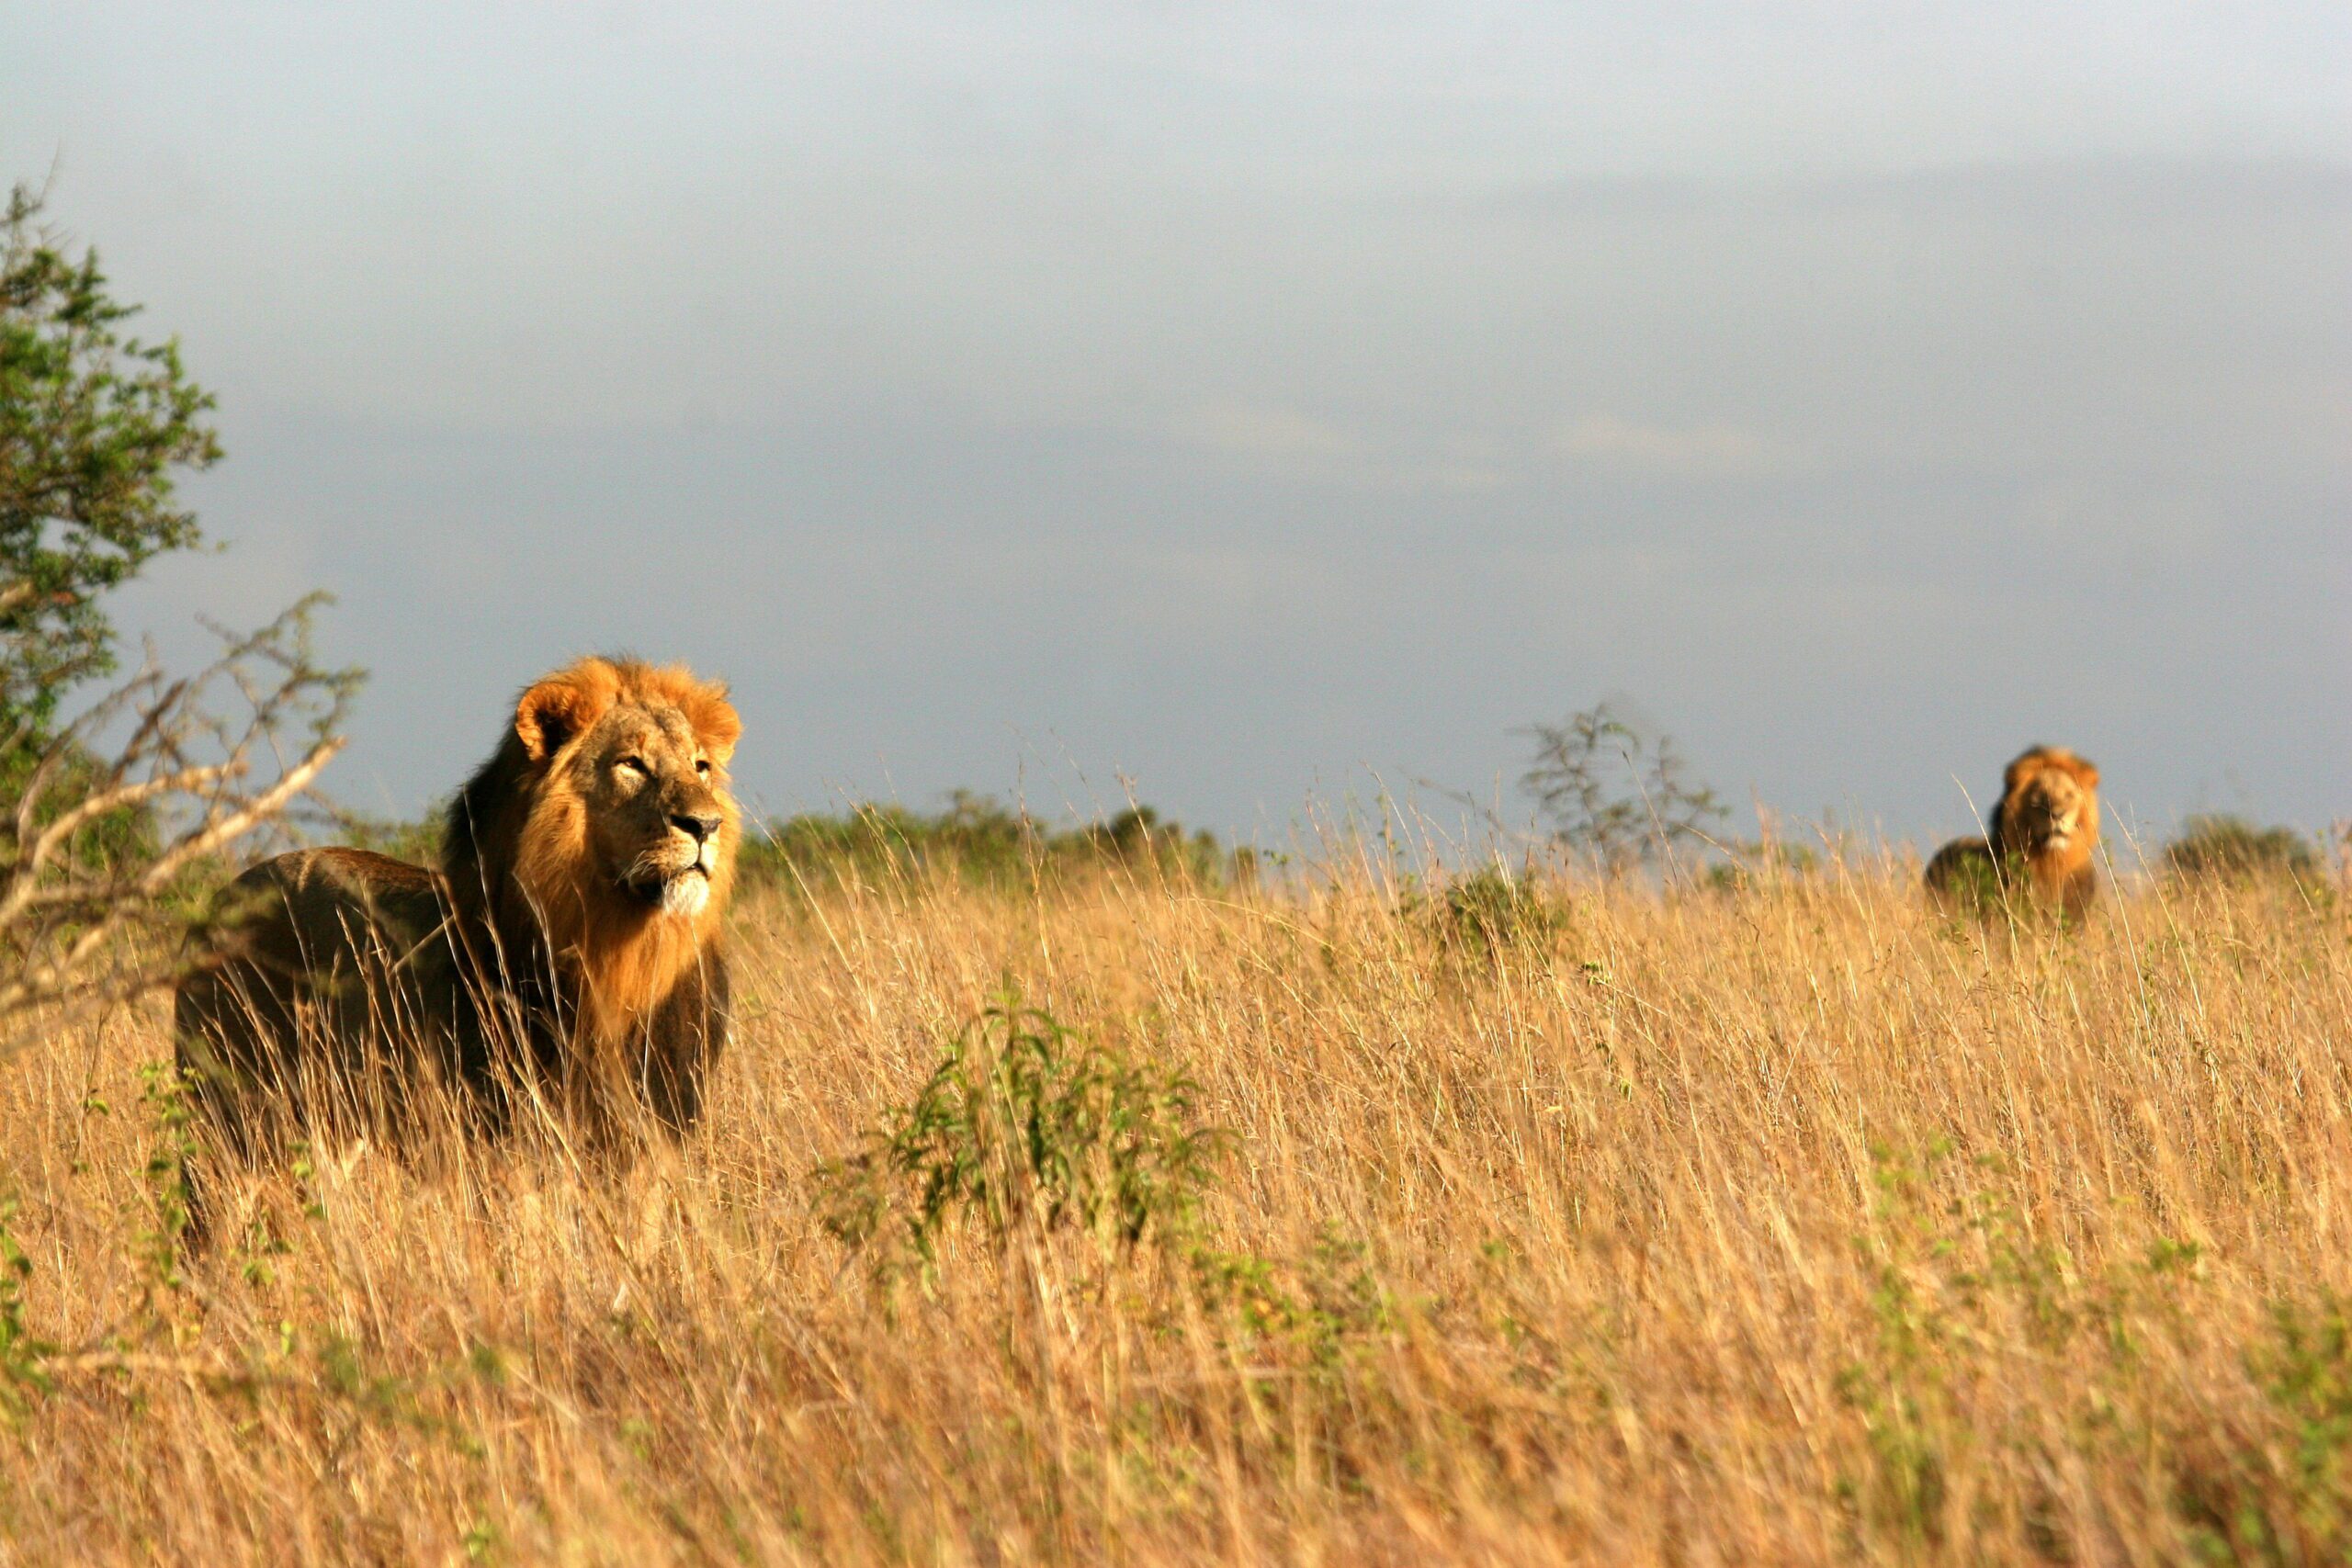 New Direct Flights from NYC to Nairobi, Lions